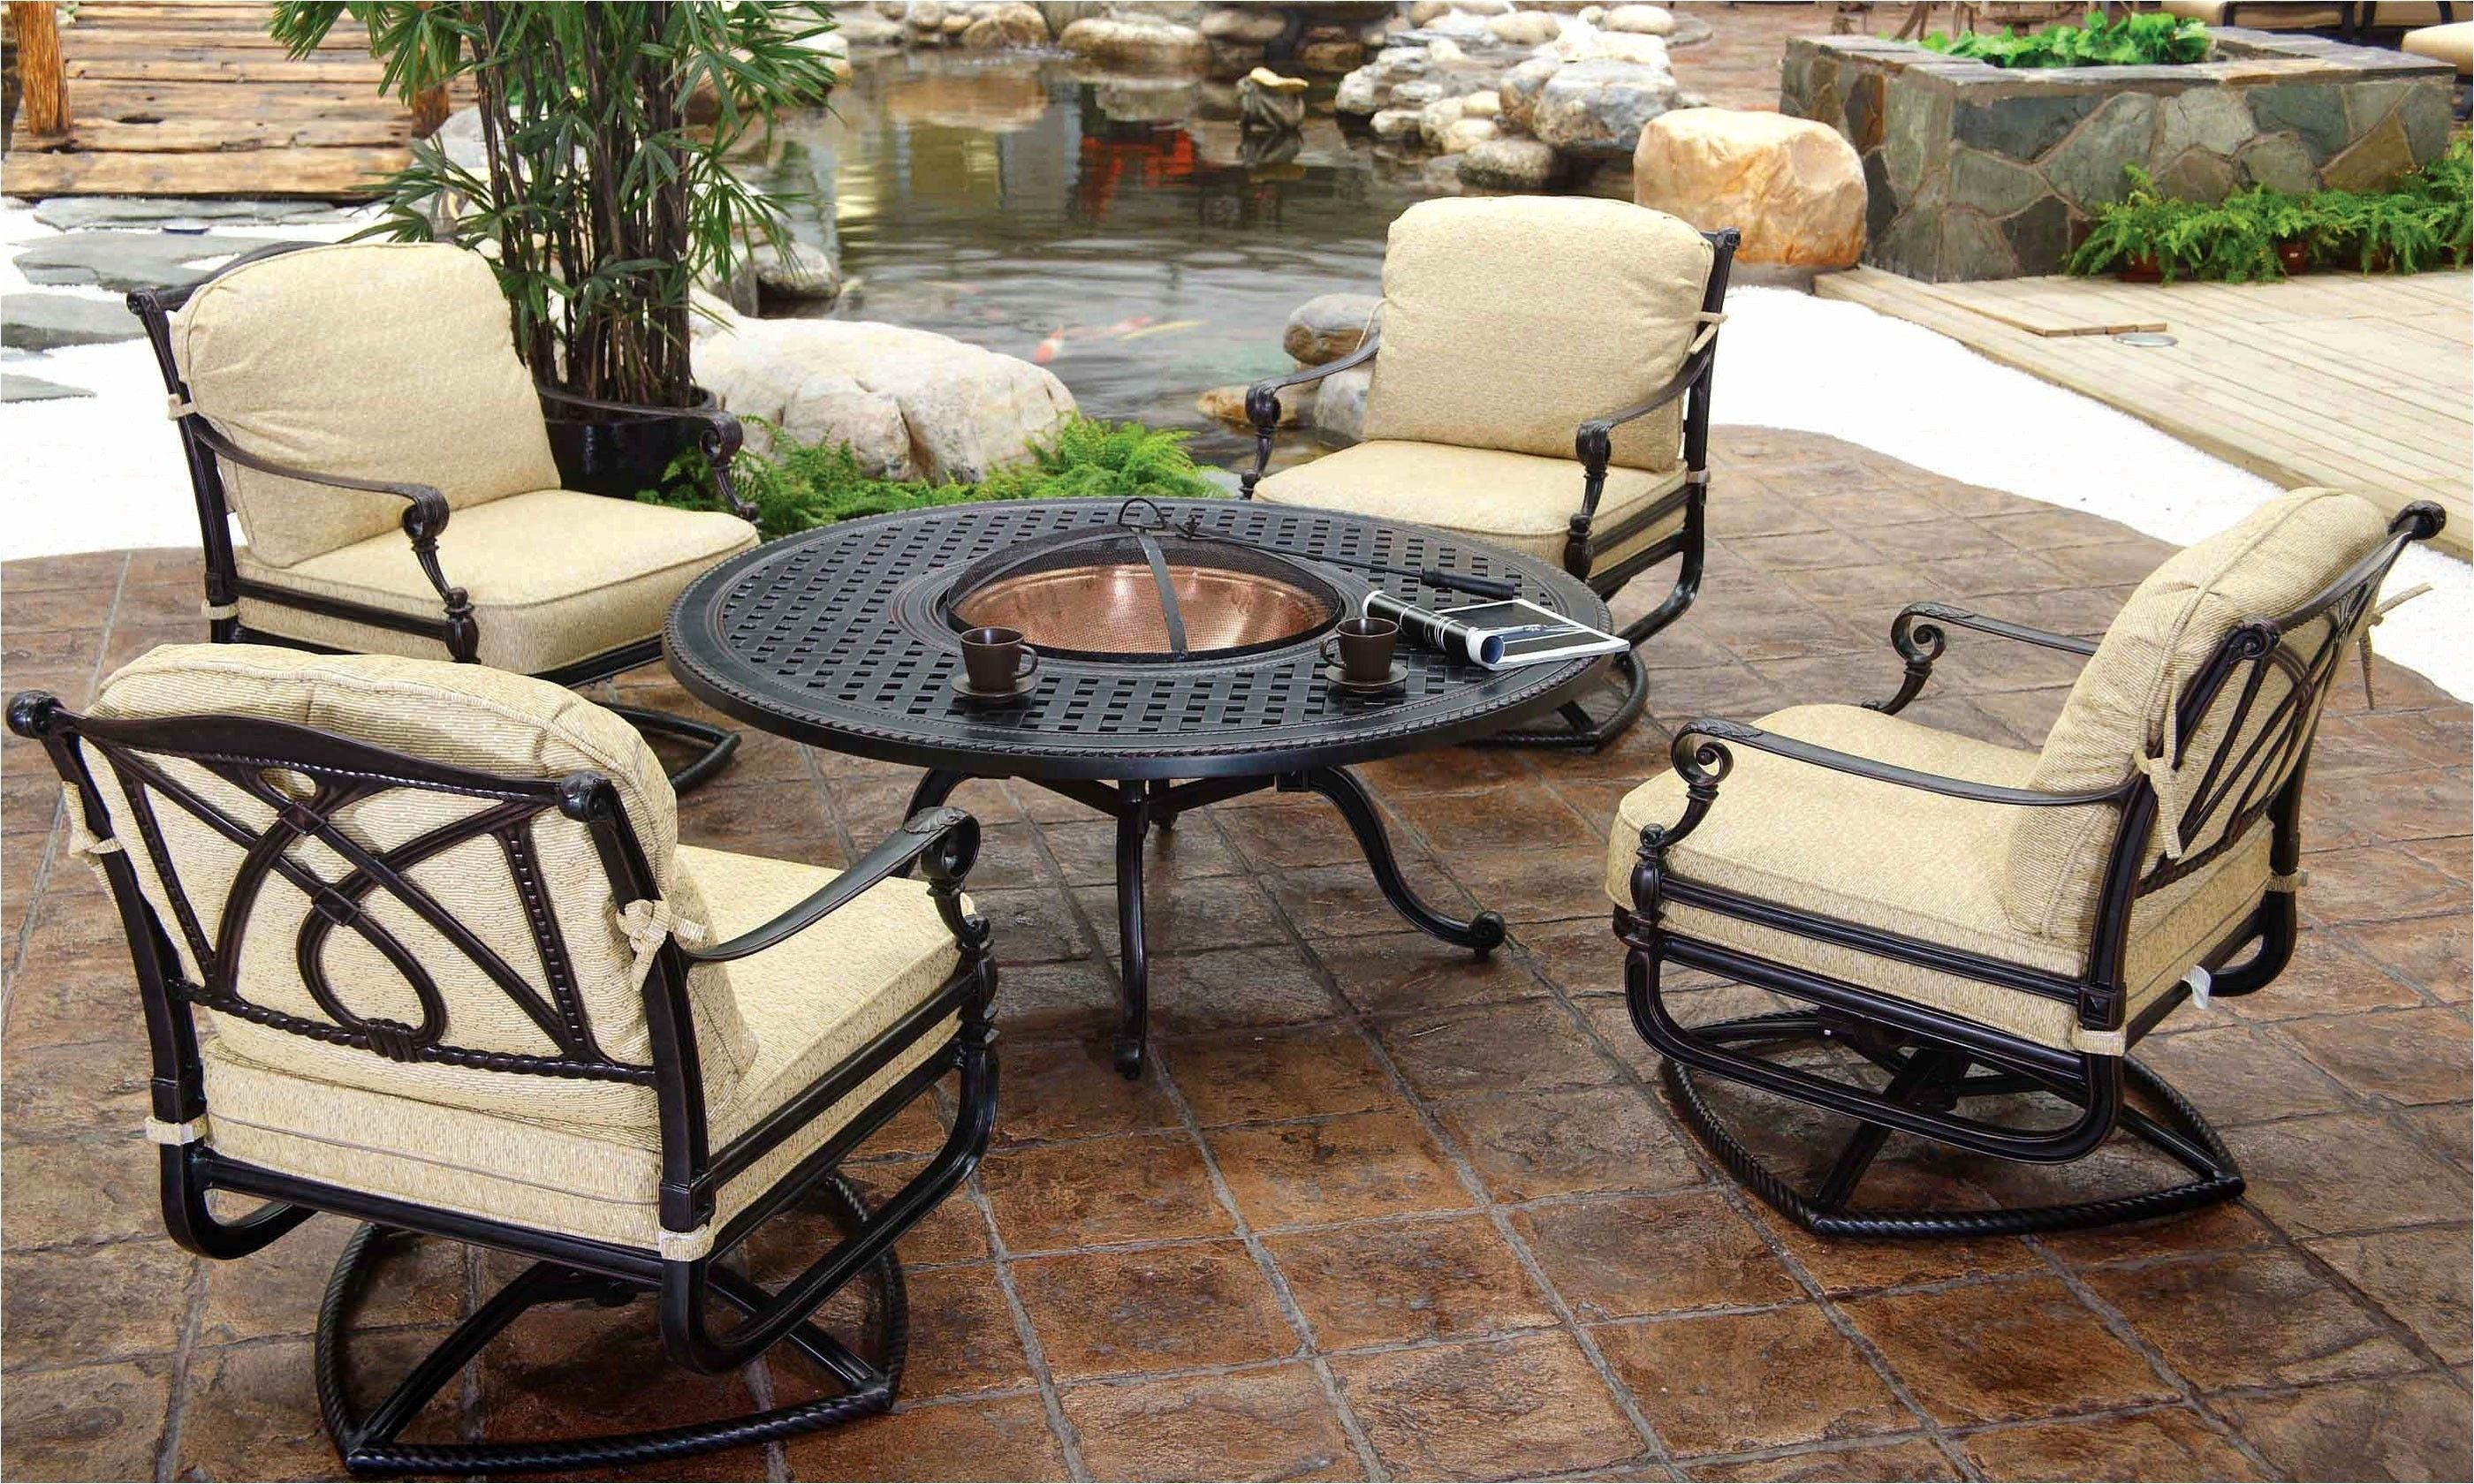 Best Patio Furniture Covers Patio Ideas Patio Furniture for dimensions 2800 X 1680